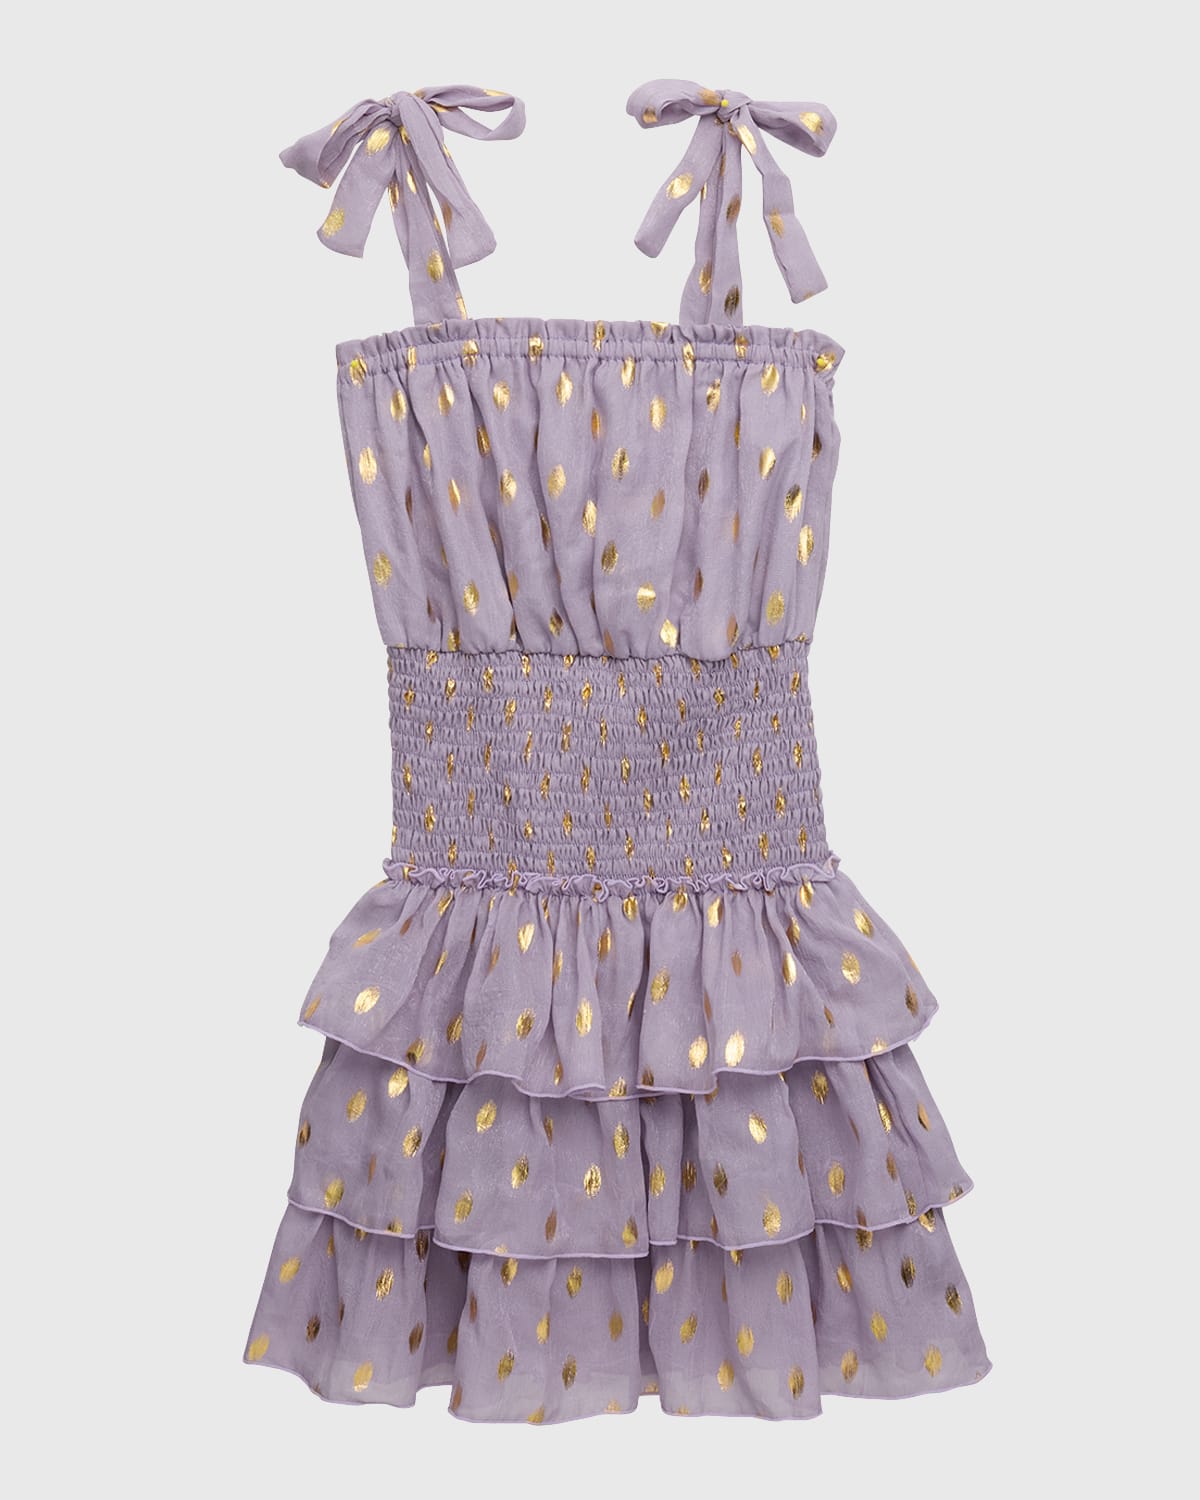 FLOWERS BY ZOE GIRL'S GOLD POLKA DOT TIERED DRESS